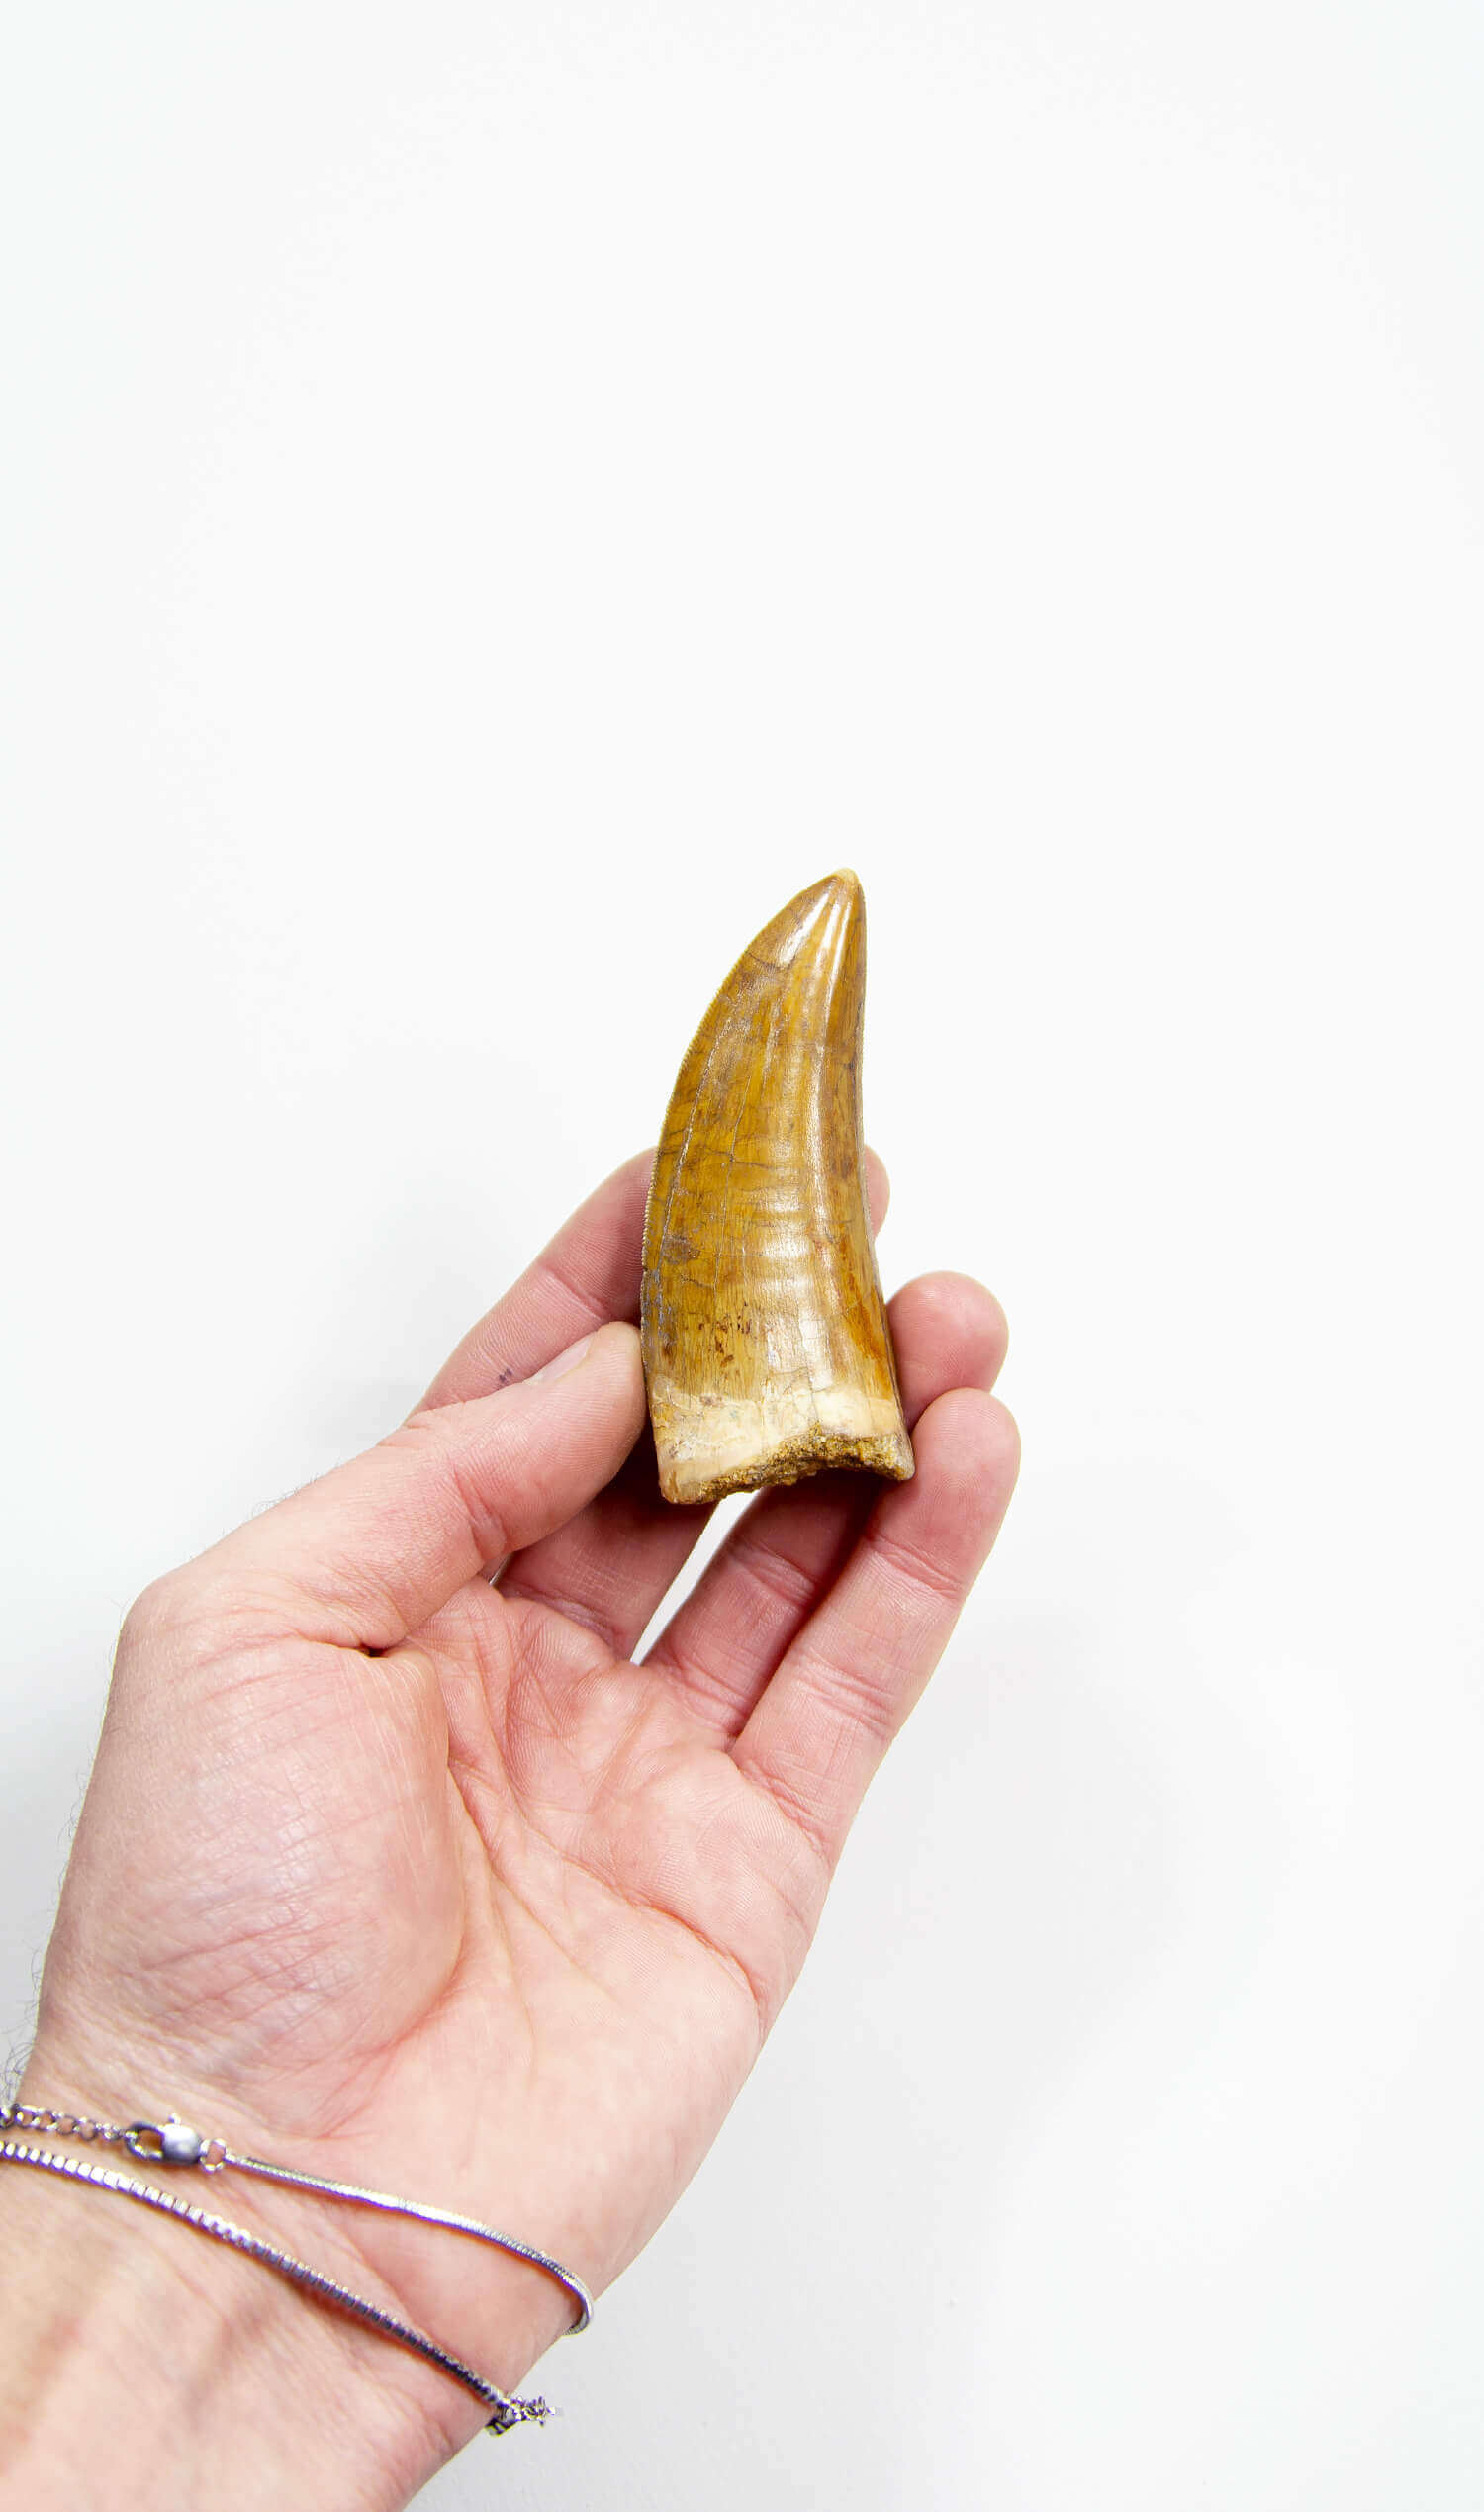 Buy Real Dinosaur Tooth, Spinosaurus Necklace in Gold, Natural Fossil  Pendant, Spinosaur Fossil Jewelry, 14k Gold Wire Wrap Jewelry for Science  Online in India - Etsy